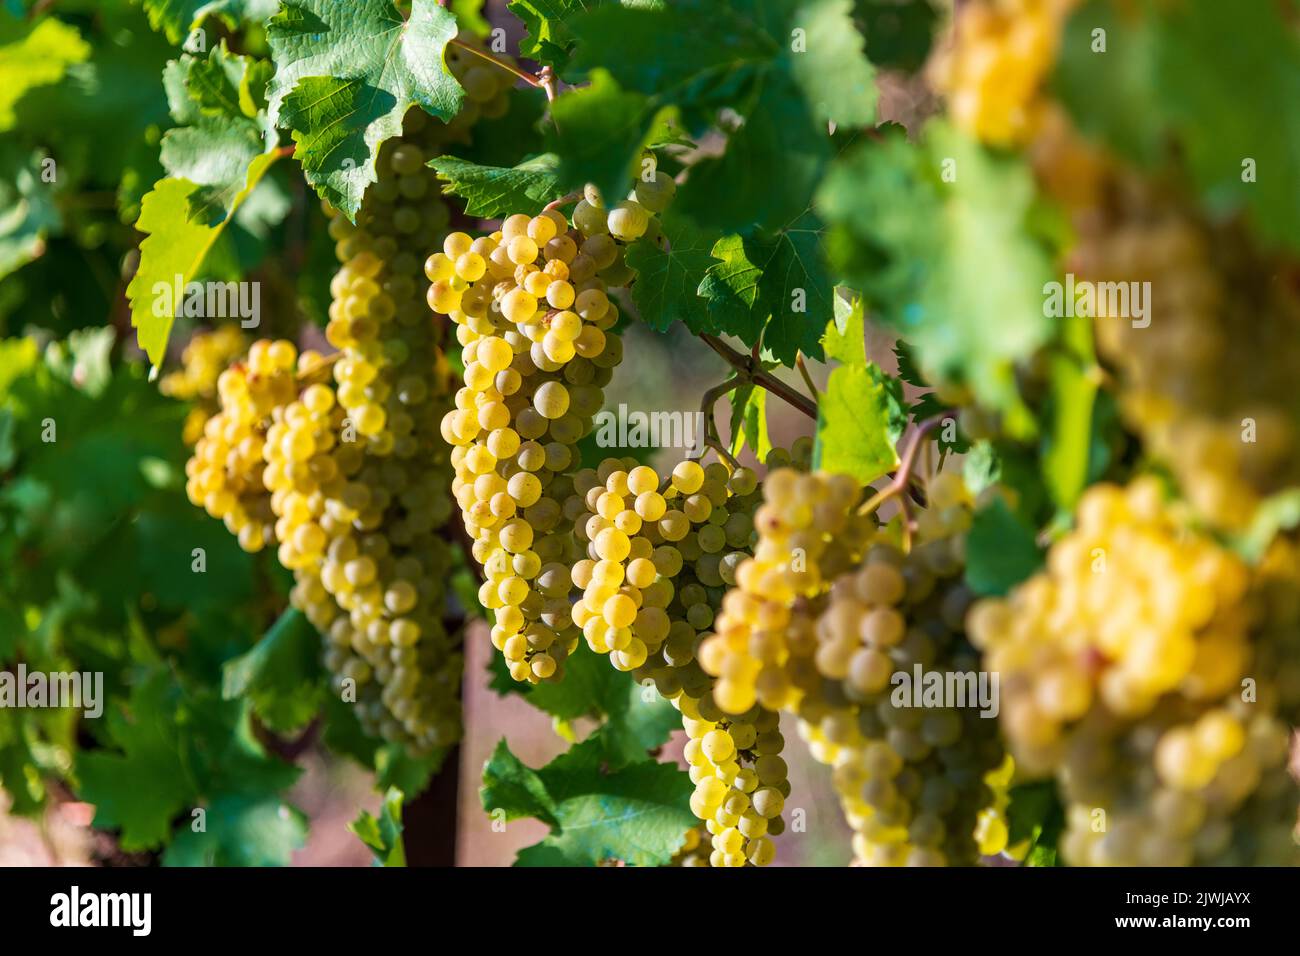 Bunches of fresh white Chardonnay grapes hanging on vines with green leaves on sunny day on vineyard Stock Photo